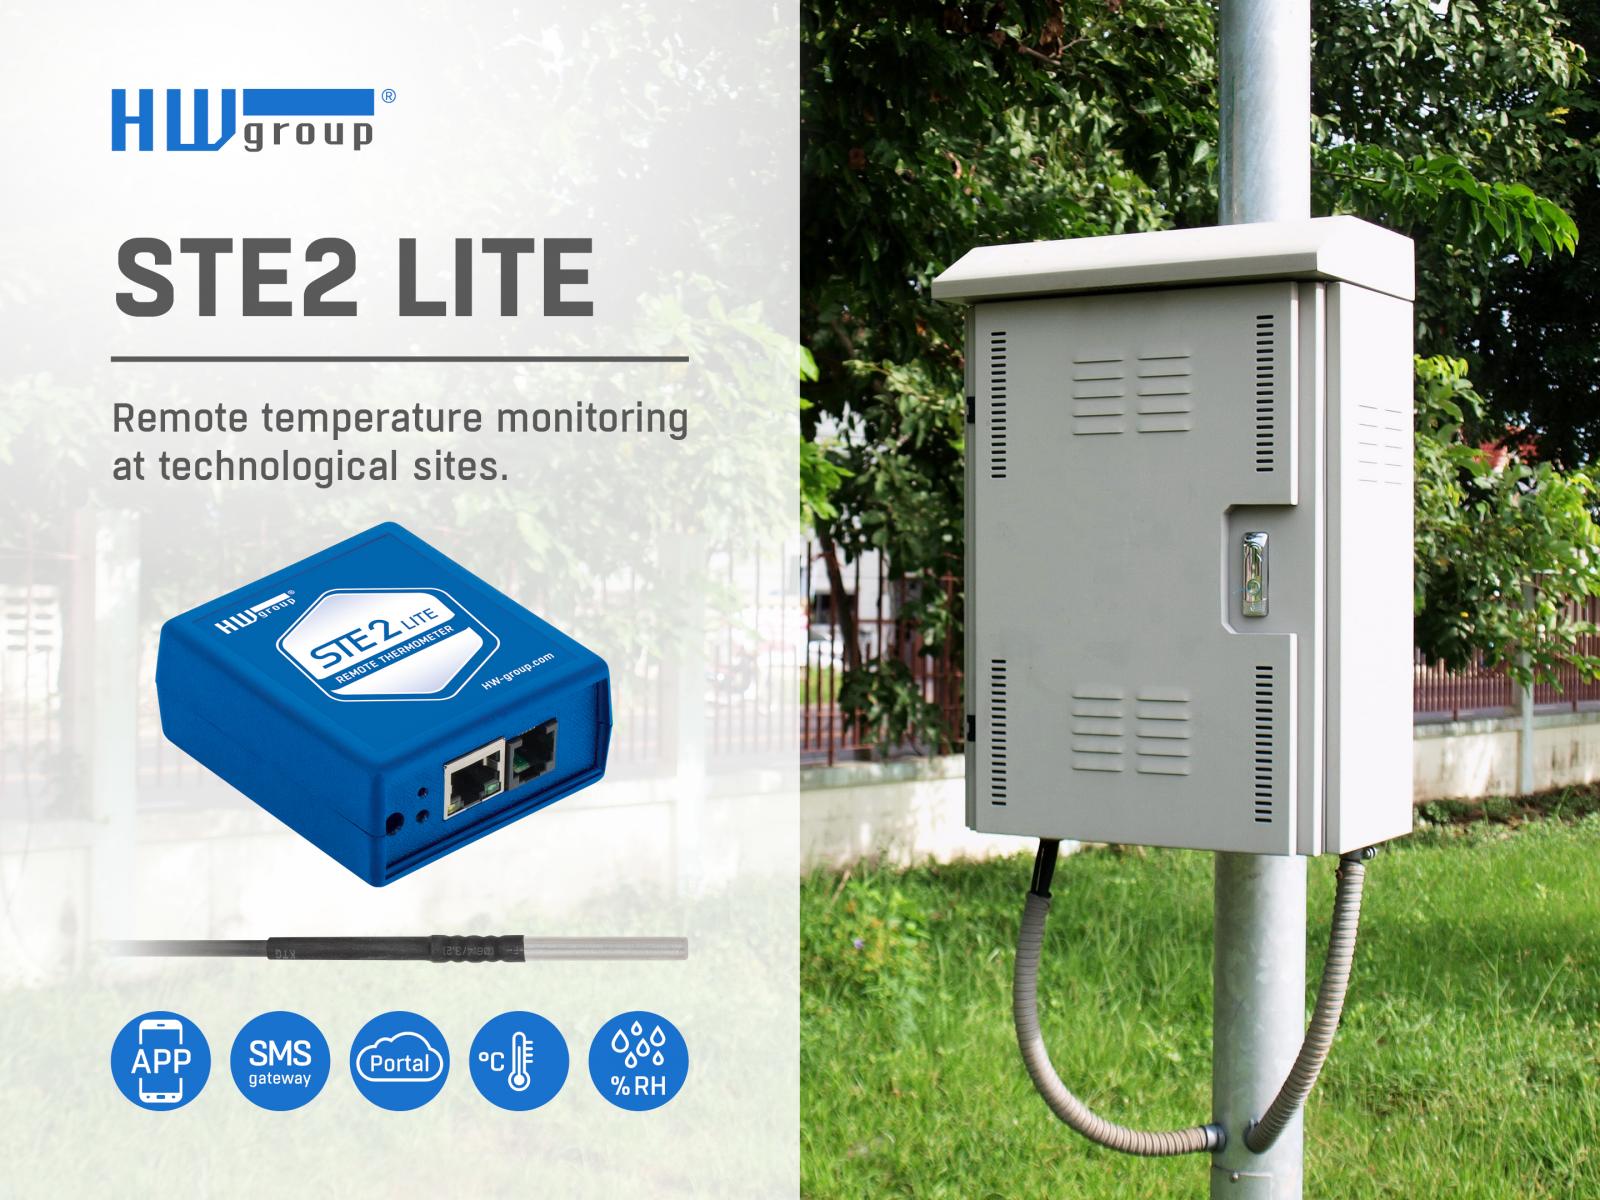 https://www.hw-group.com/files/styles/large/public/press/10777-monitor-temperature-at-remote-locations-with-ste2-lite/ste2liteapk-technologicalsites.jpg